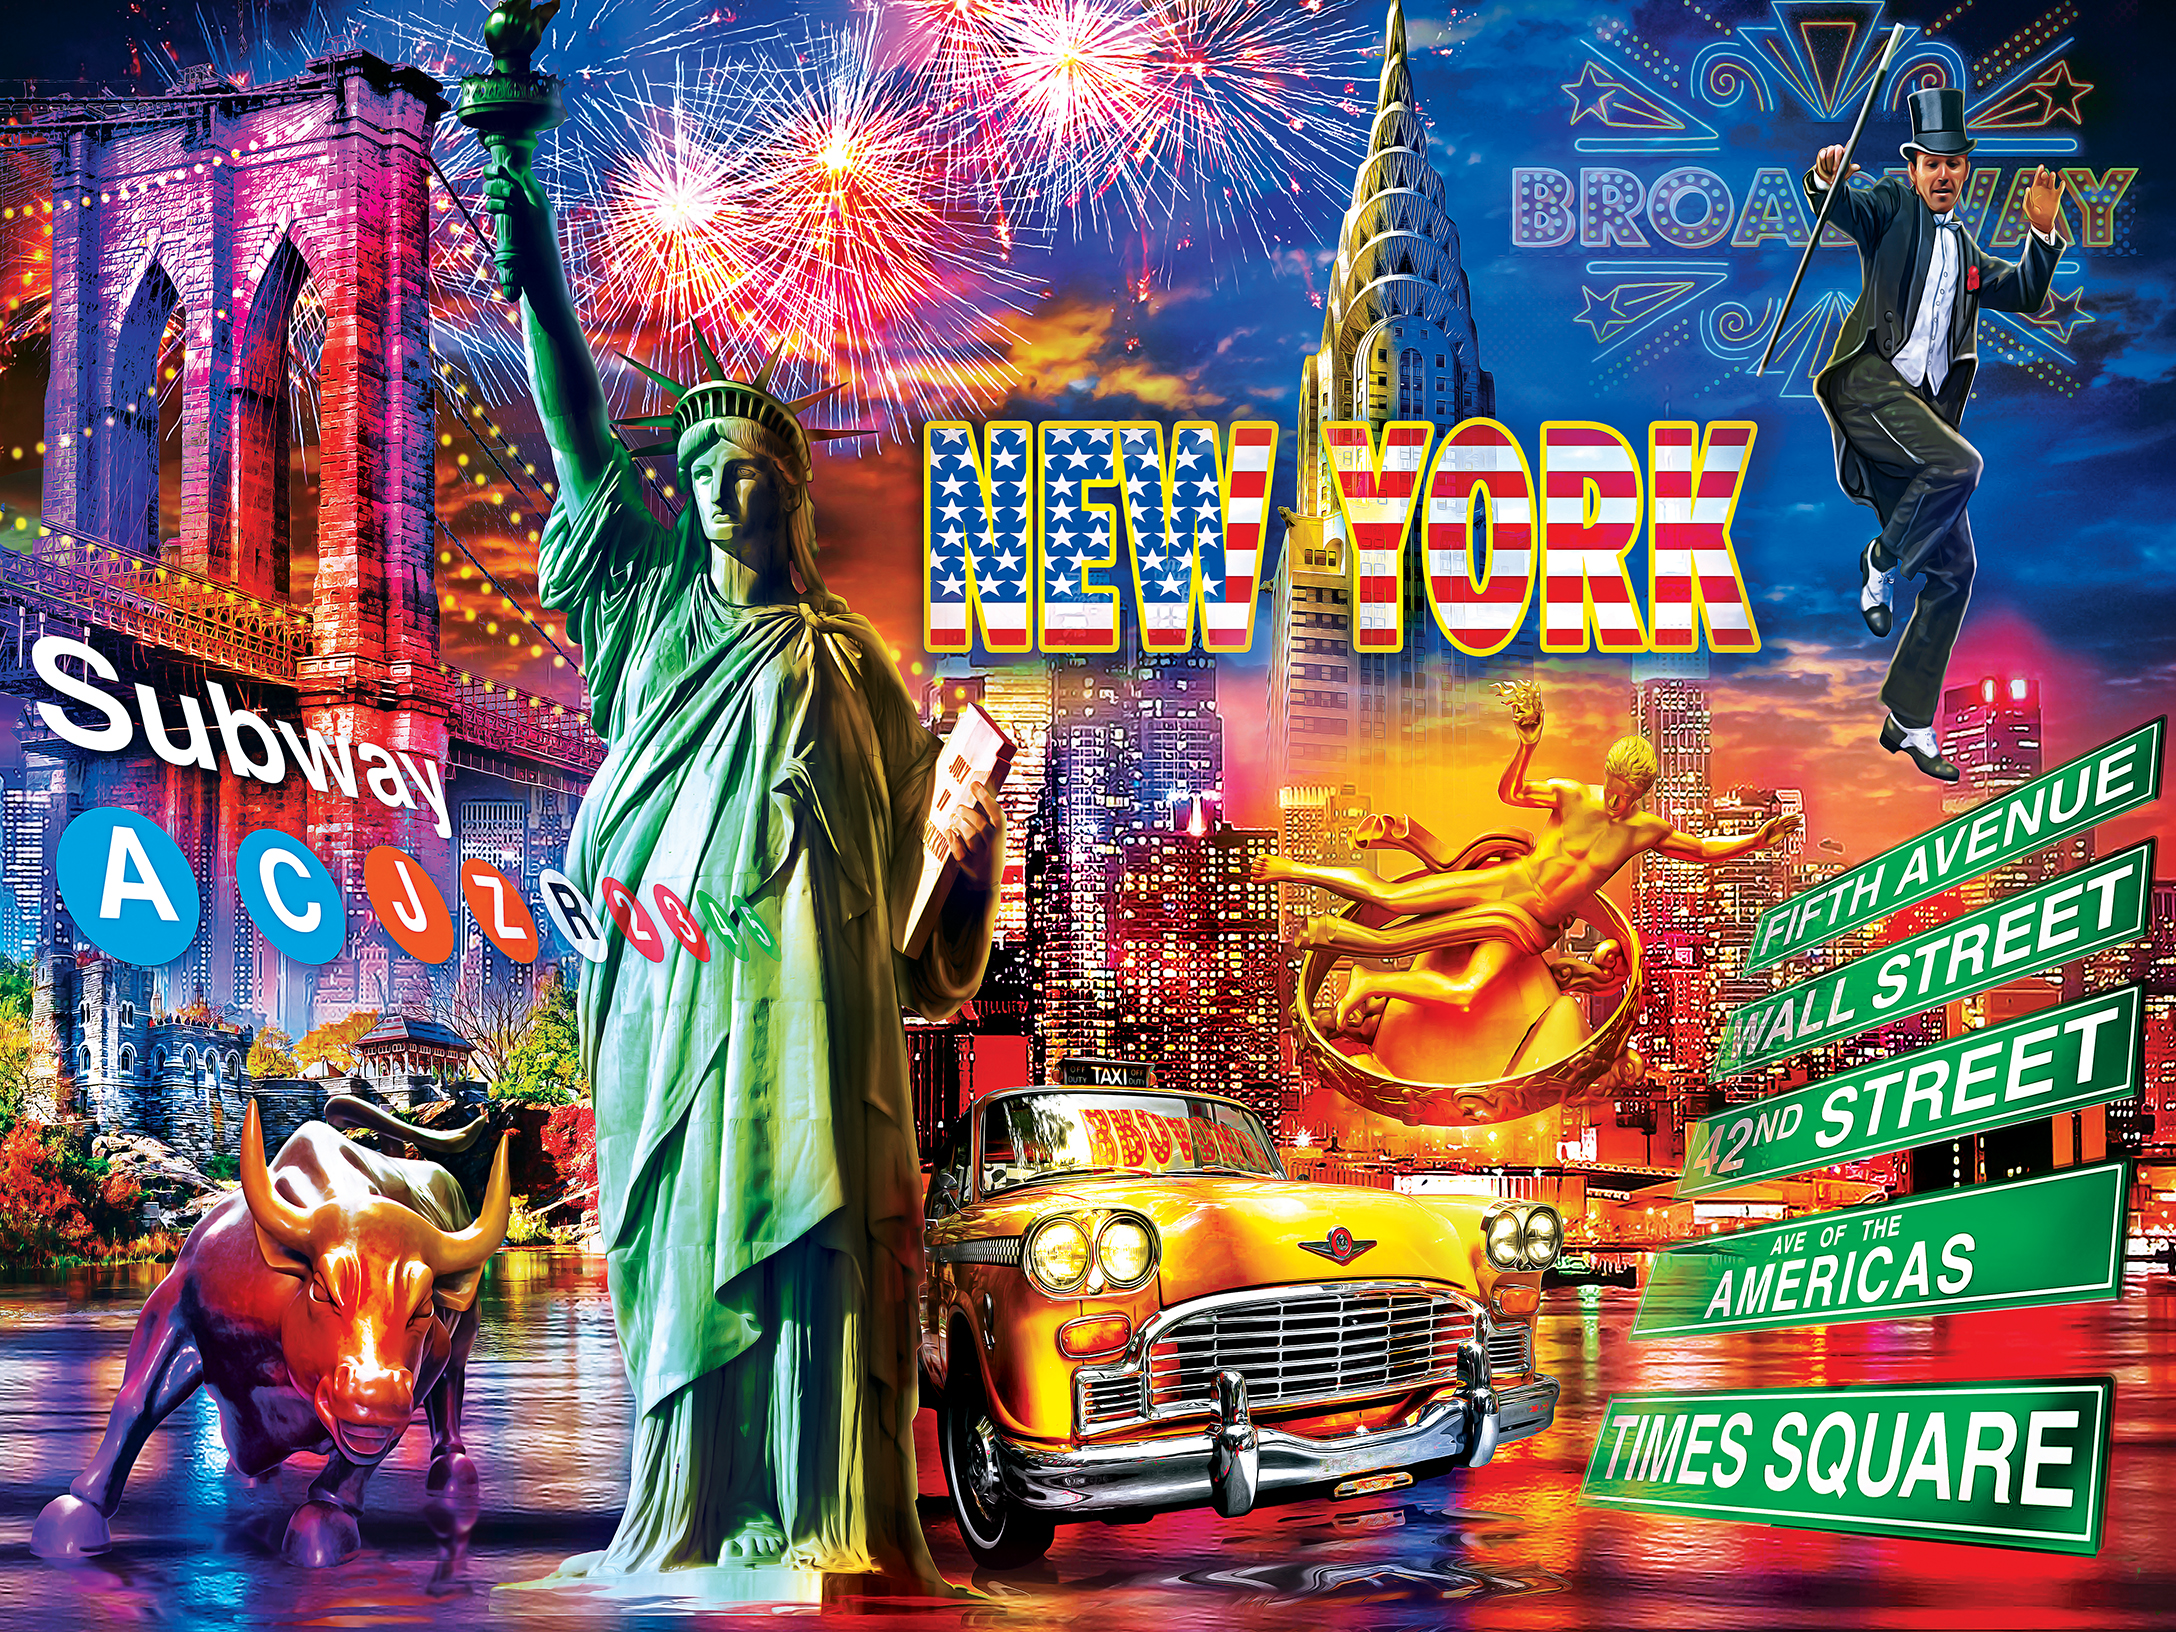 Greetings From New York City Landmarks & Monuments Jigsaw Puzzle